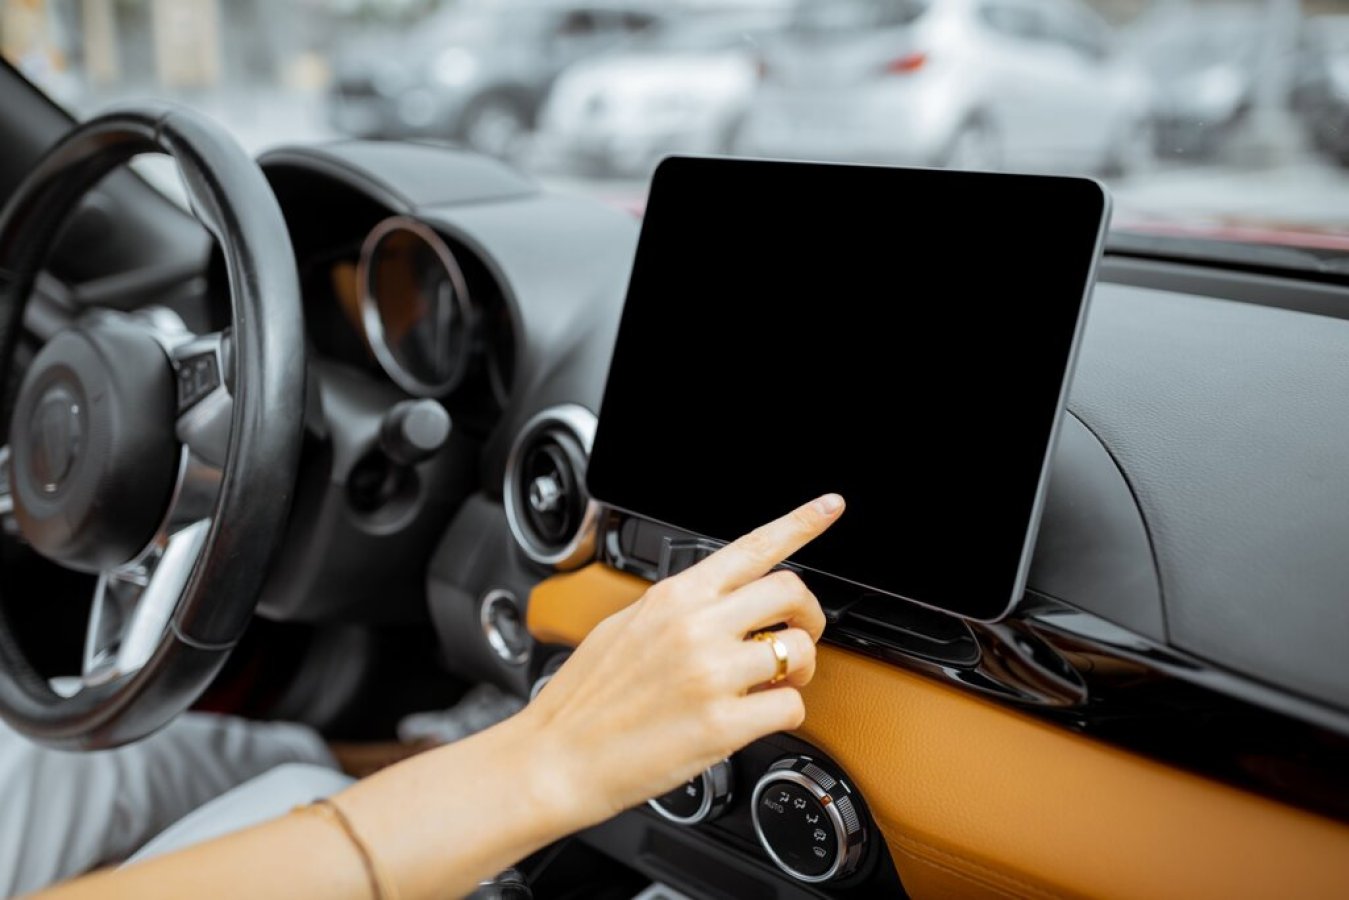 Vehicle touchscreens—real treats or deal breakers?